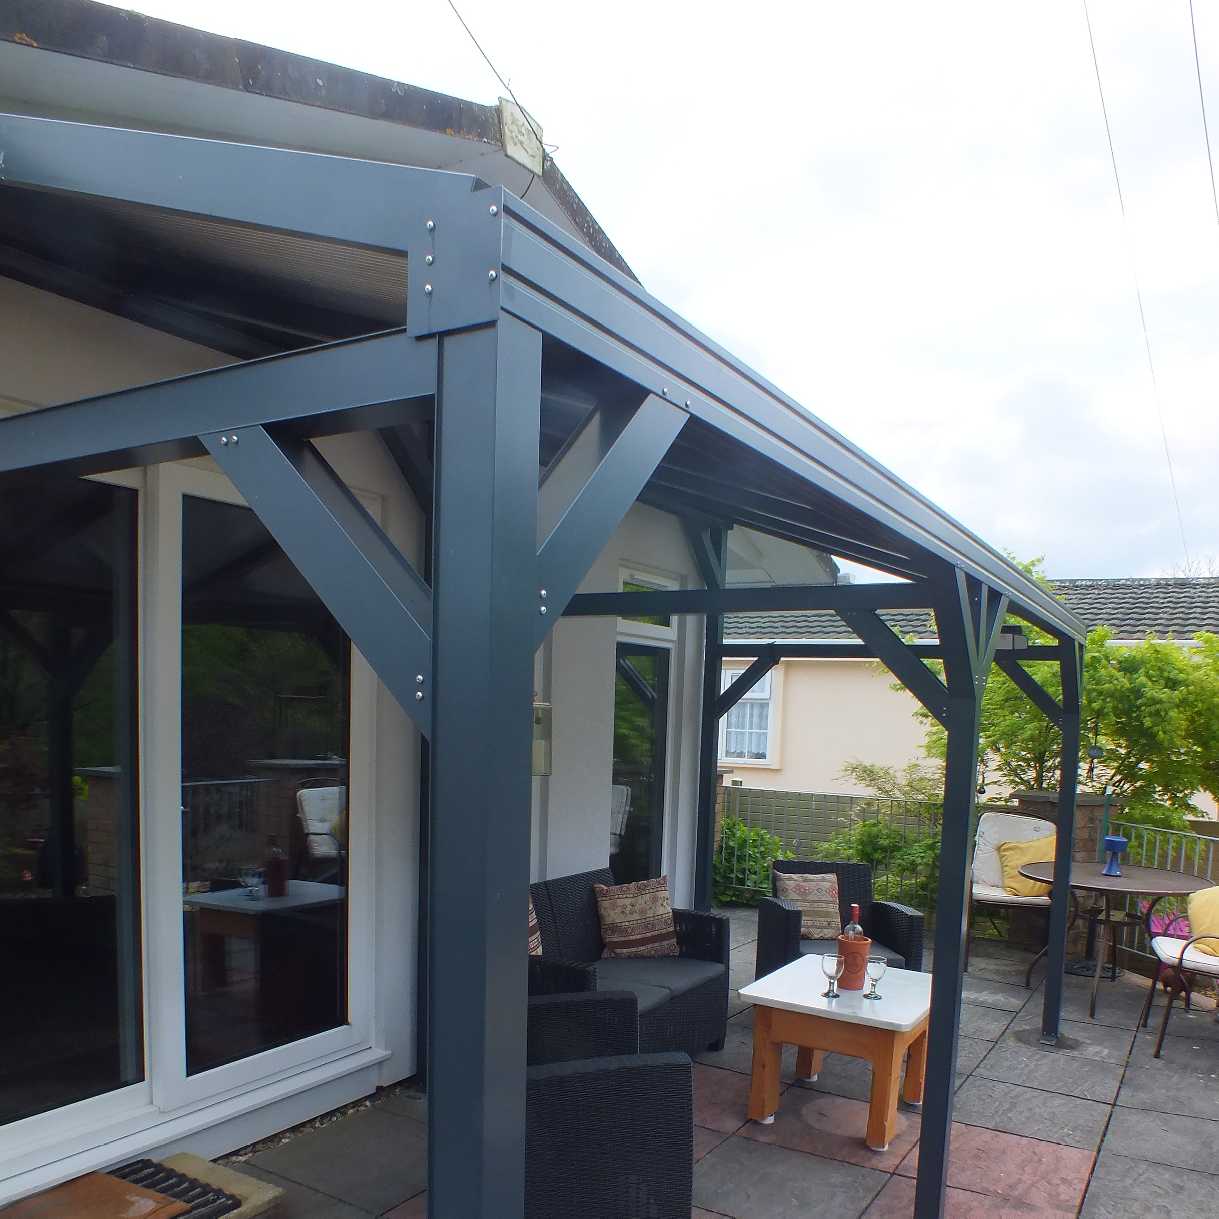 Affordable Omega Smart Free-Standing, Anthracite Grey MonoPitch Roof Canopy with 16mm Polycarbonate Glazing - 7.0m (W) x 3.5m (P), (8) Supporting Posts